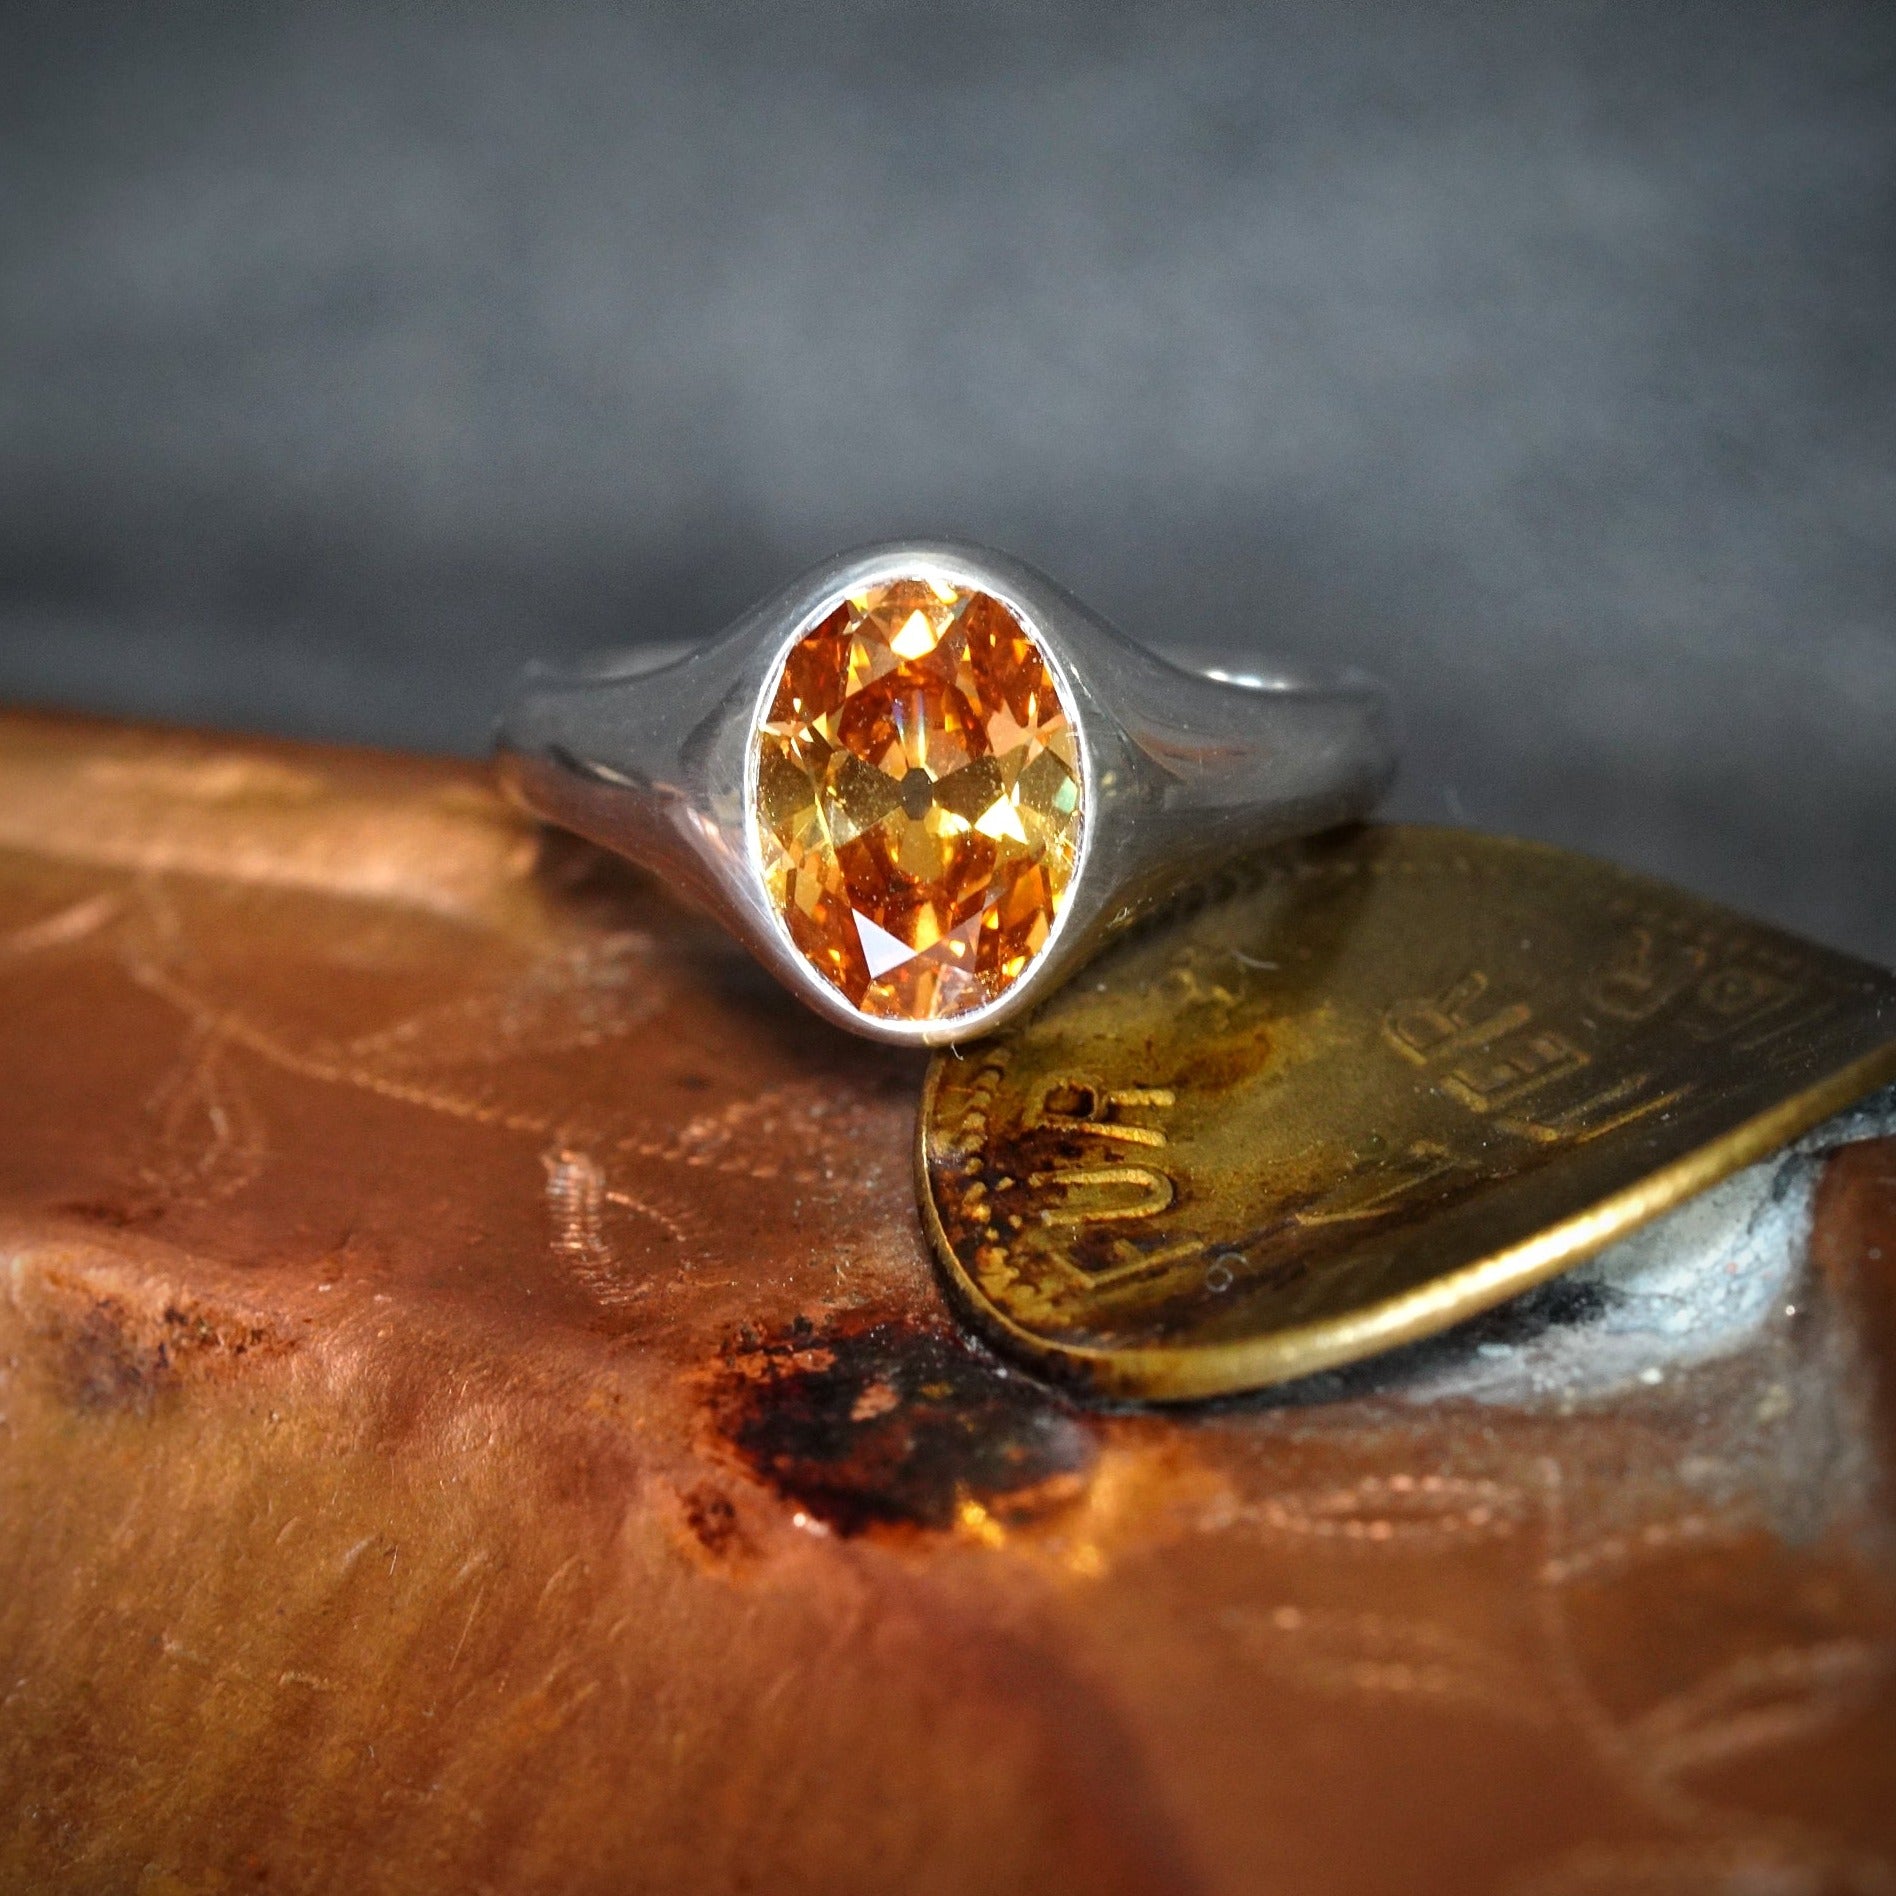 Amber-Hued 2.10 Carat Oval Diamond Ring: A Victorian-Inspired Piece of Art